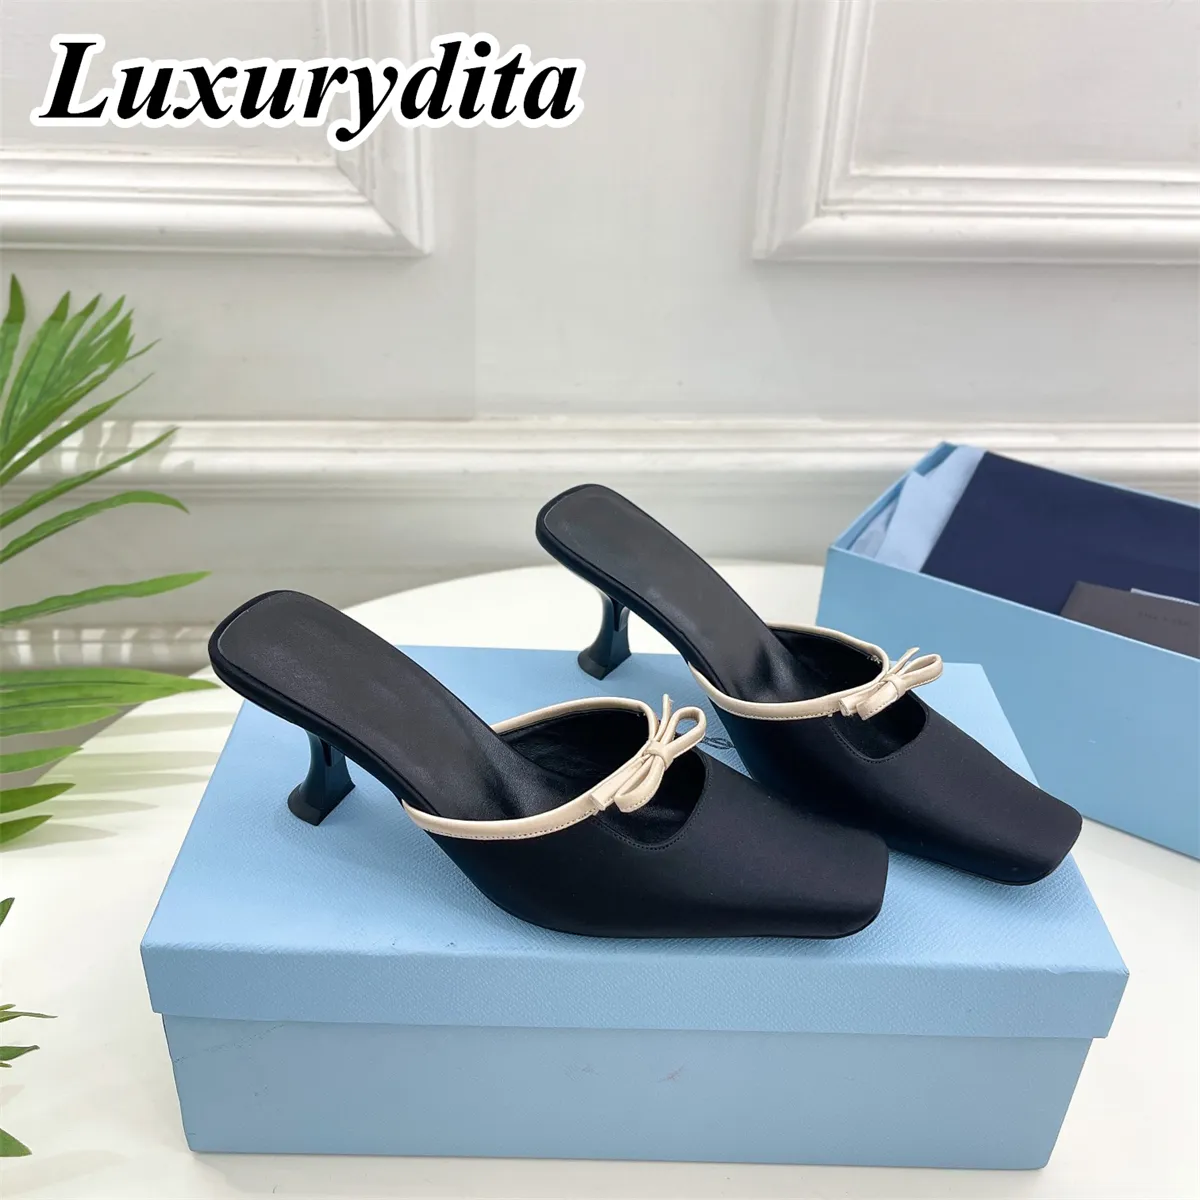 High quality Designer Womens High Heels Luxury Dinner Leather Sandals Fashion Design Casual Muller Shoes Office Girl Bar Shoes for ladys triangle heel YMPR 0024